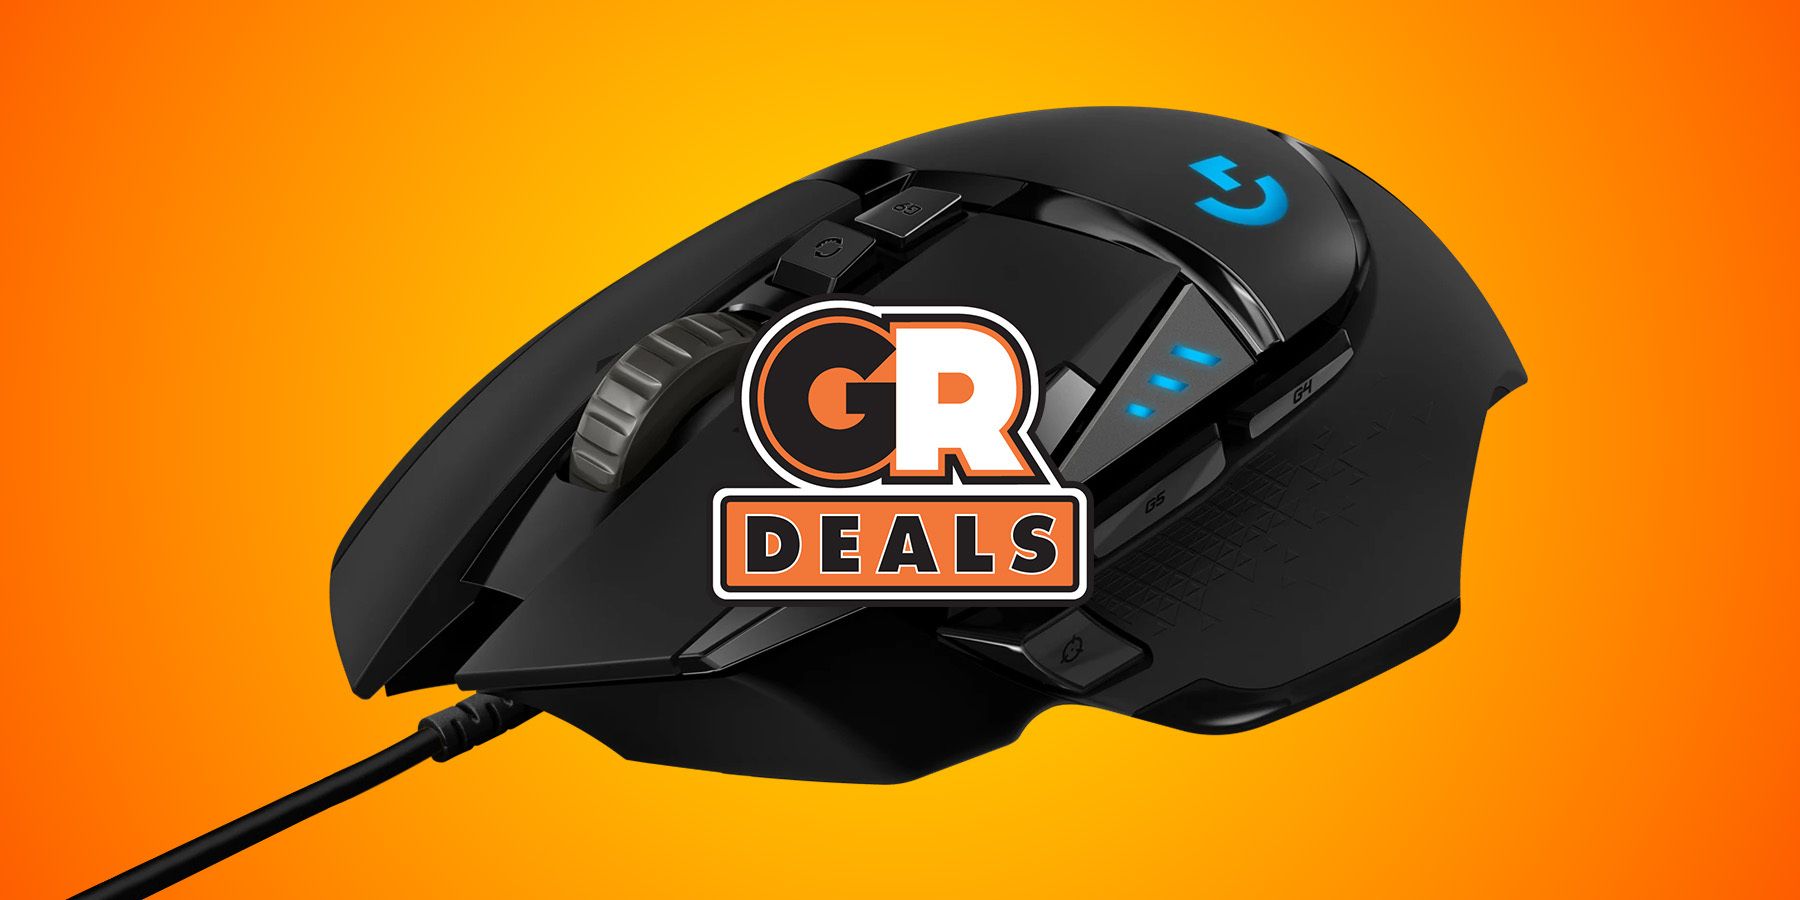 The Logitech G502 Hero Gaming Mouse is Available at a 50% Discount